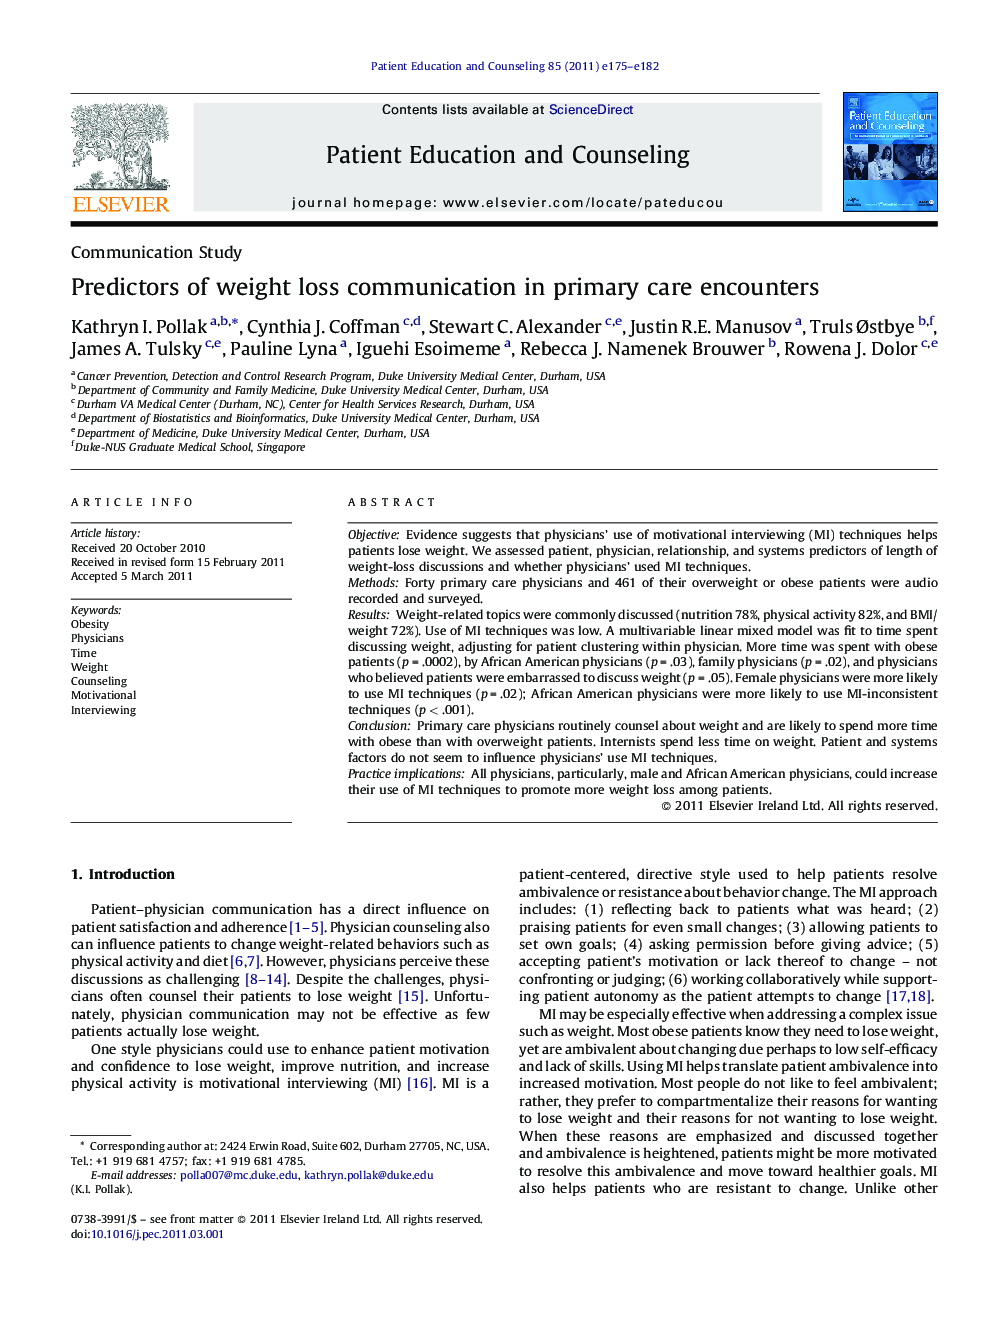 Predictors of weight loss communication in primary care encounters